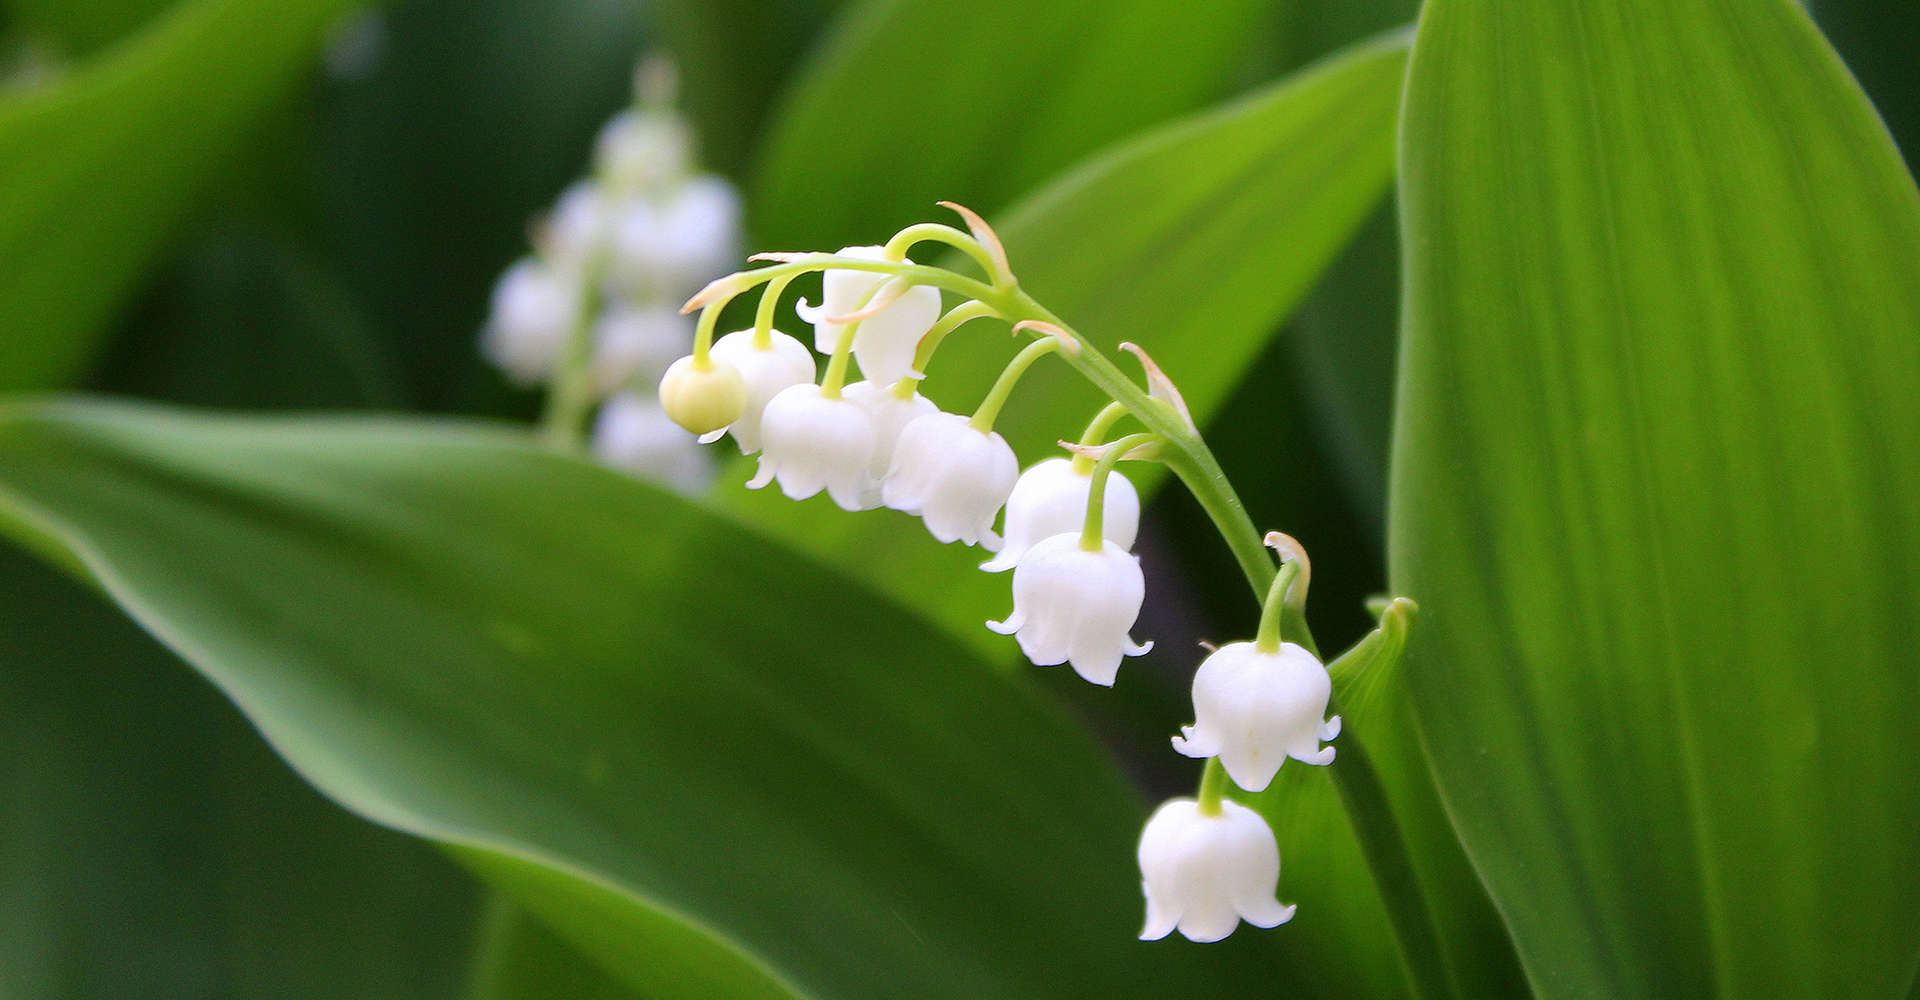 Lily Of The Valley Care Guide: How To Grow Lily Of The Valley | DIY Garden